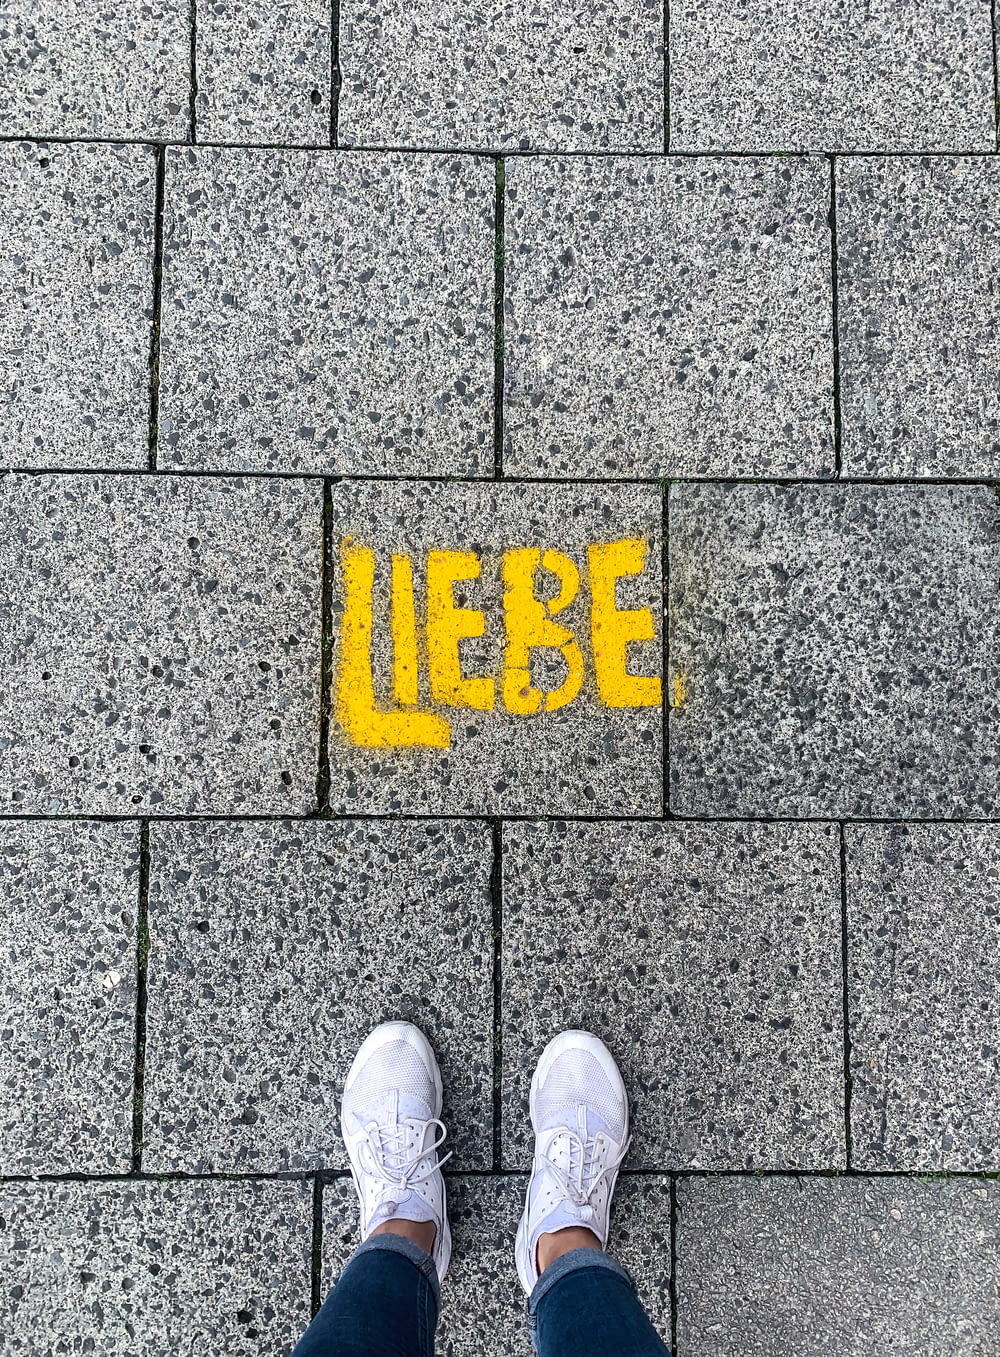 a person standing in front of a sidewalk with the word liebe painted on it